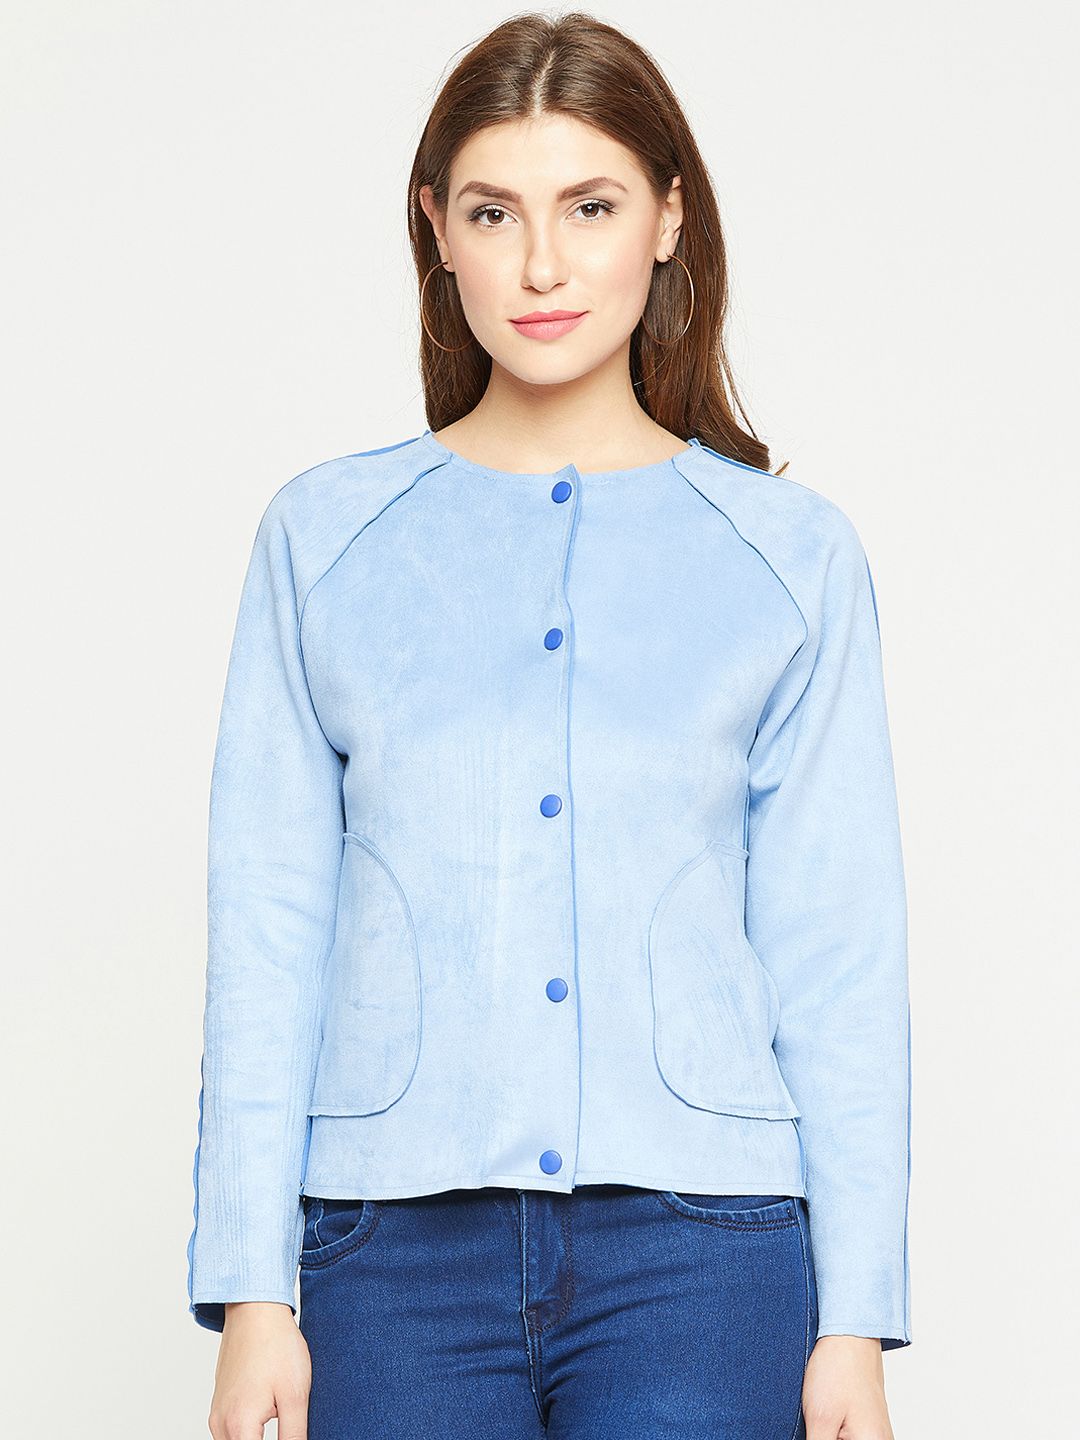 Marie Claire Women Turquoise Blue Solid Suede Tailored Jacket Price in India